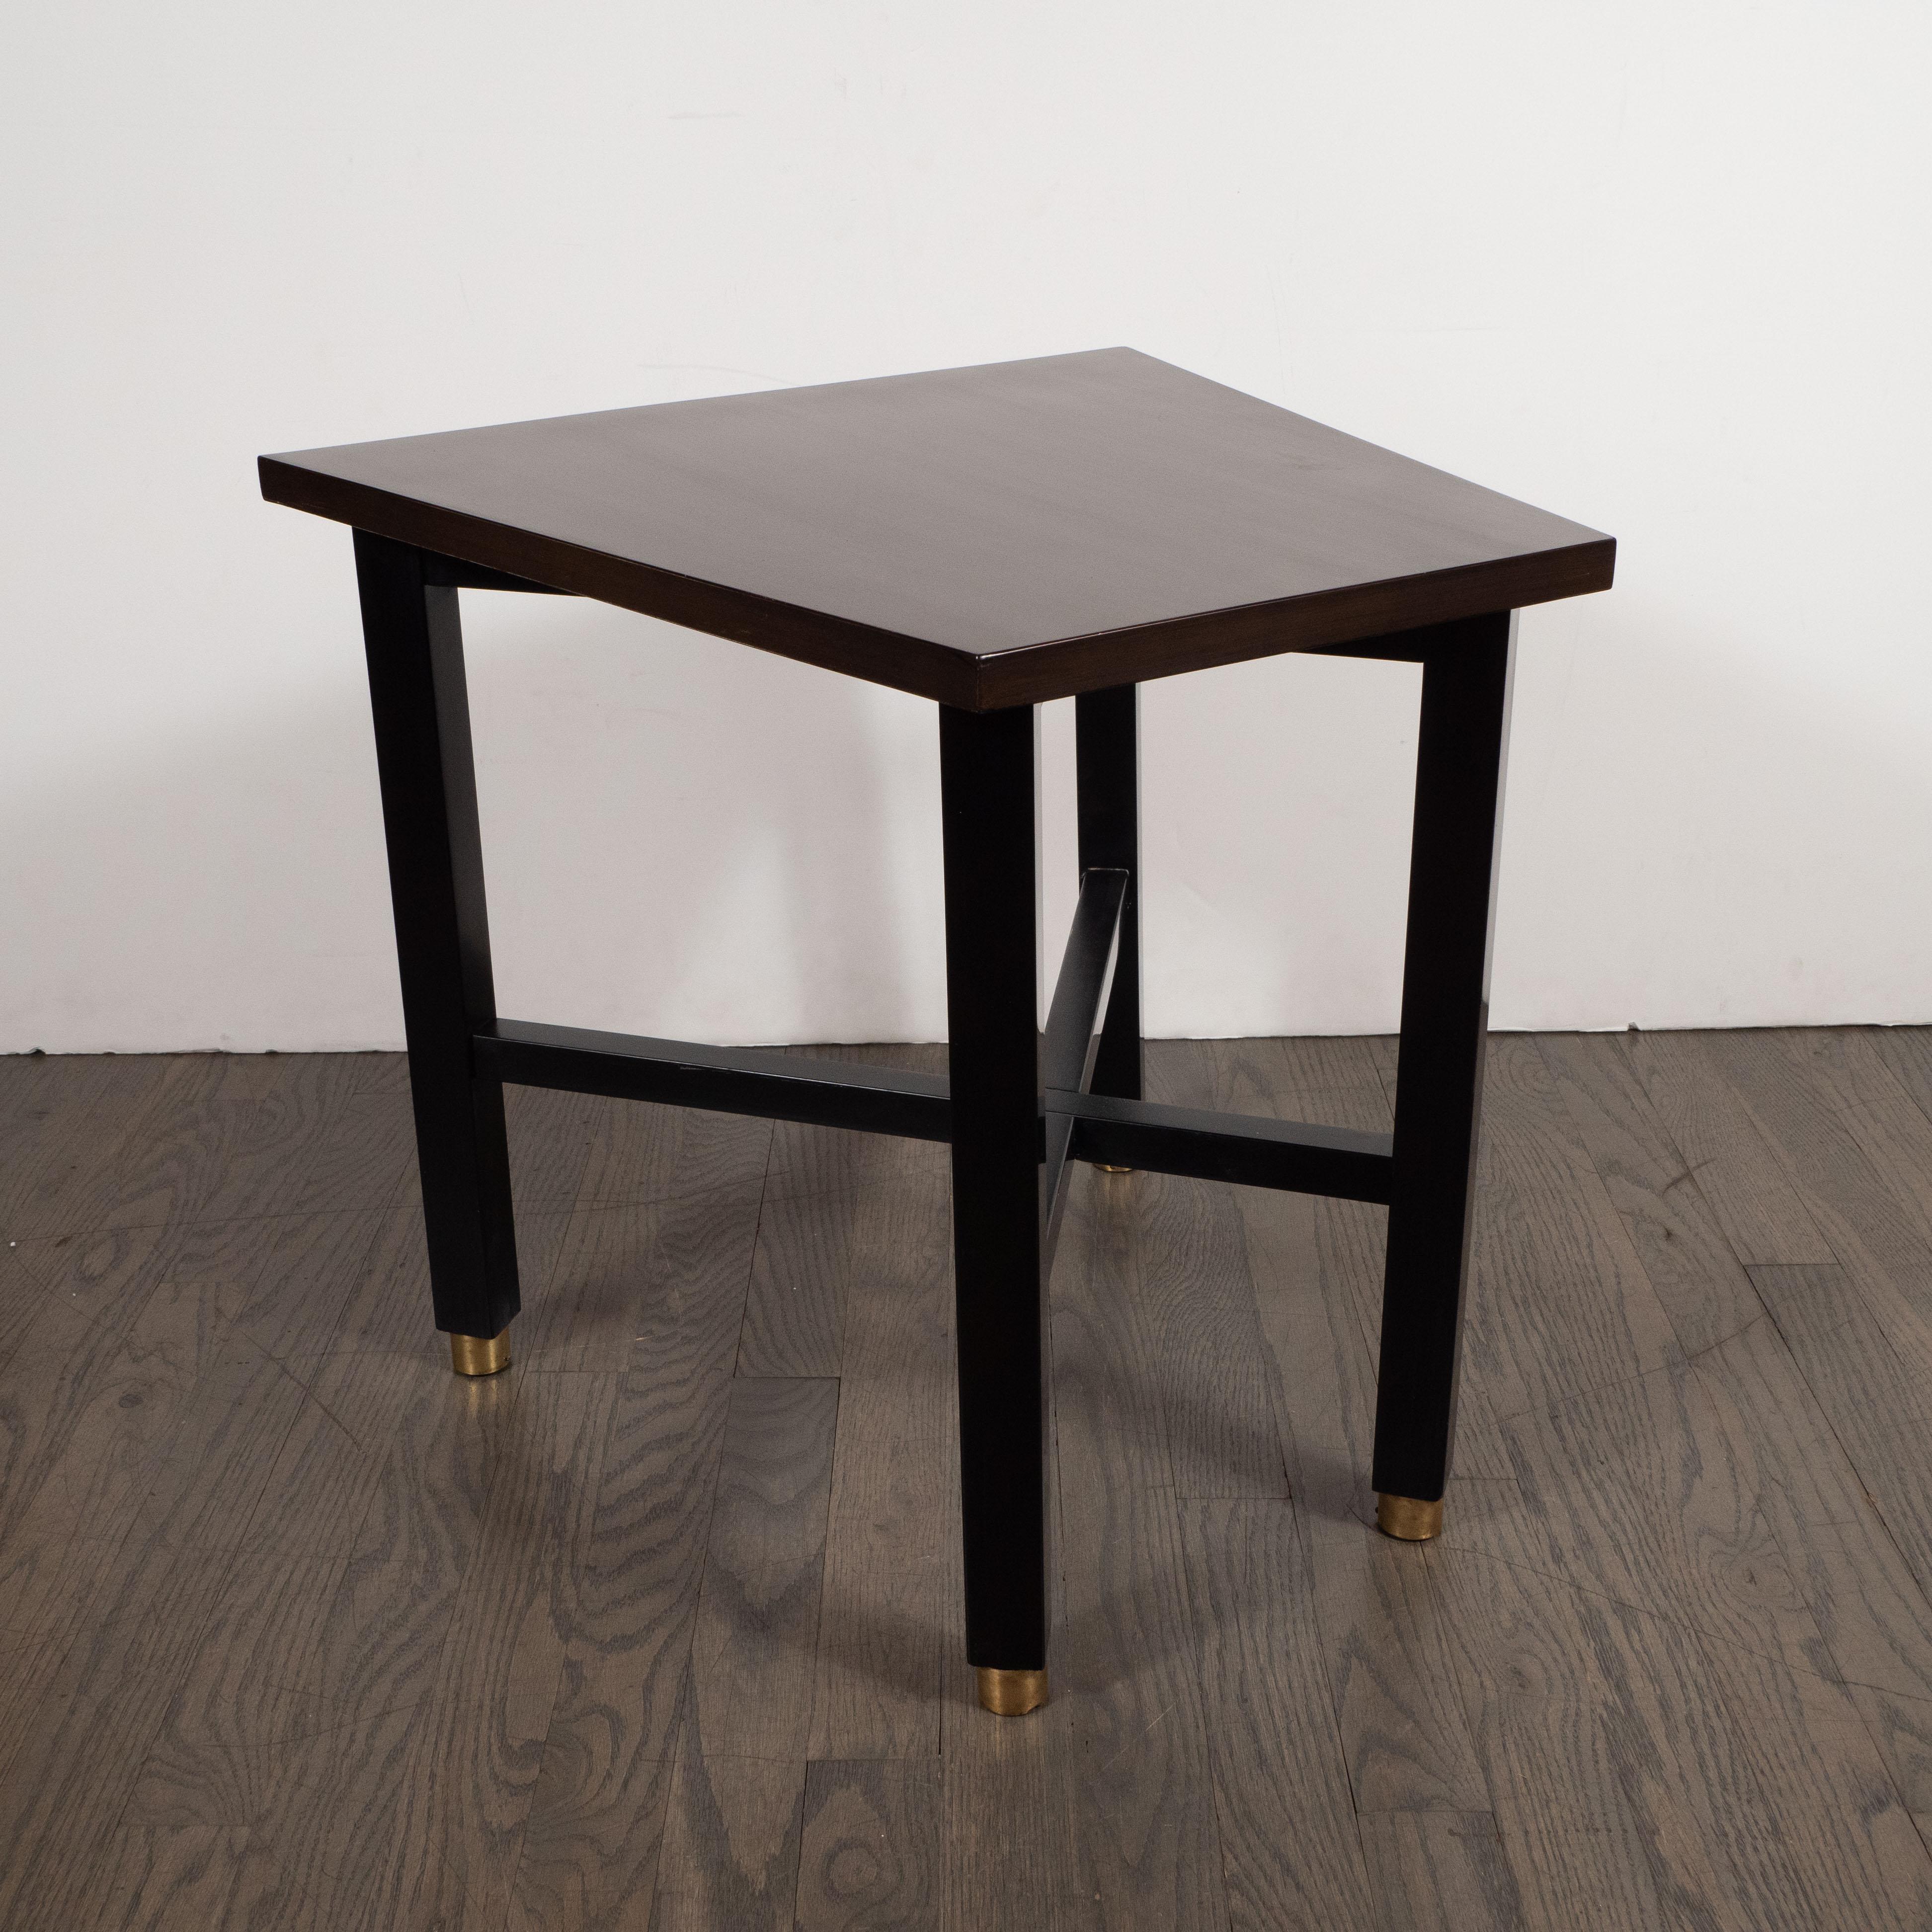 Designed by Dunbar and handcrafted in Berne, Indiana, this elegant side table was realized in the United States circa 1950. Featuring a hand rubbed walnut trapezoidal top and ebonized rectangular legs that sit on brass sabots, this piece is a study